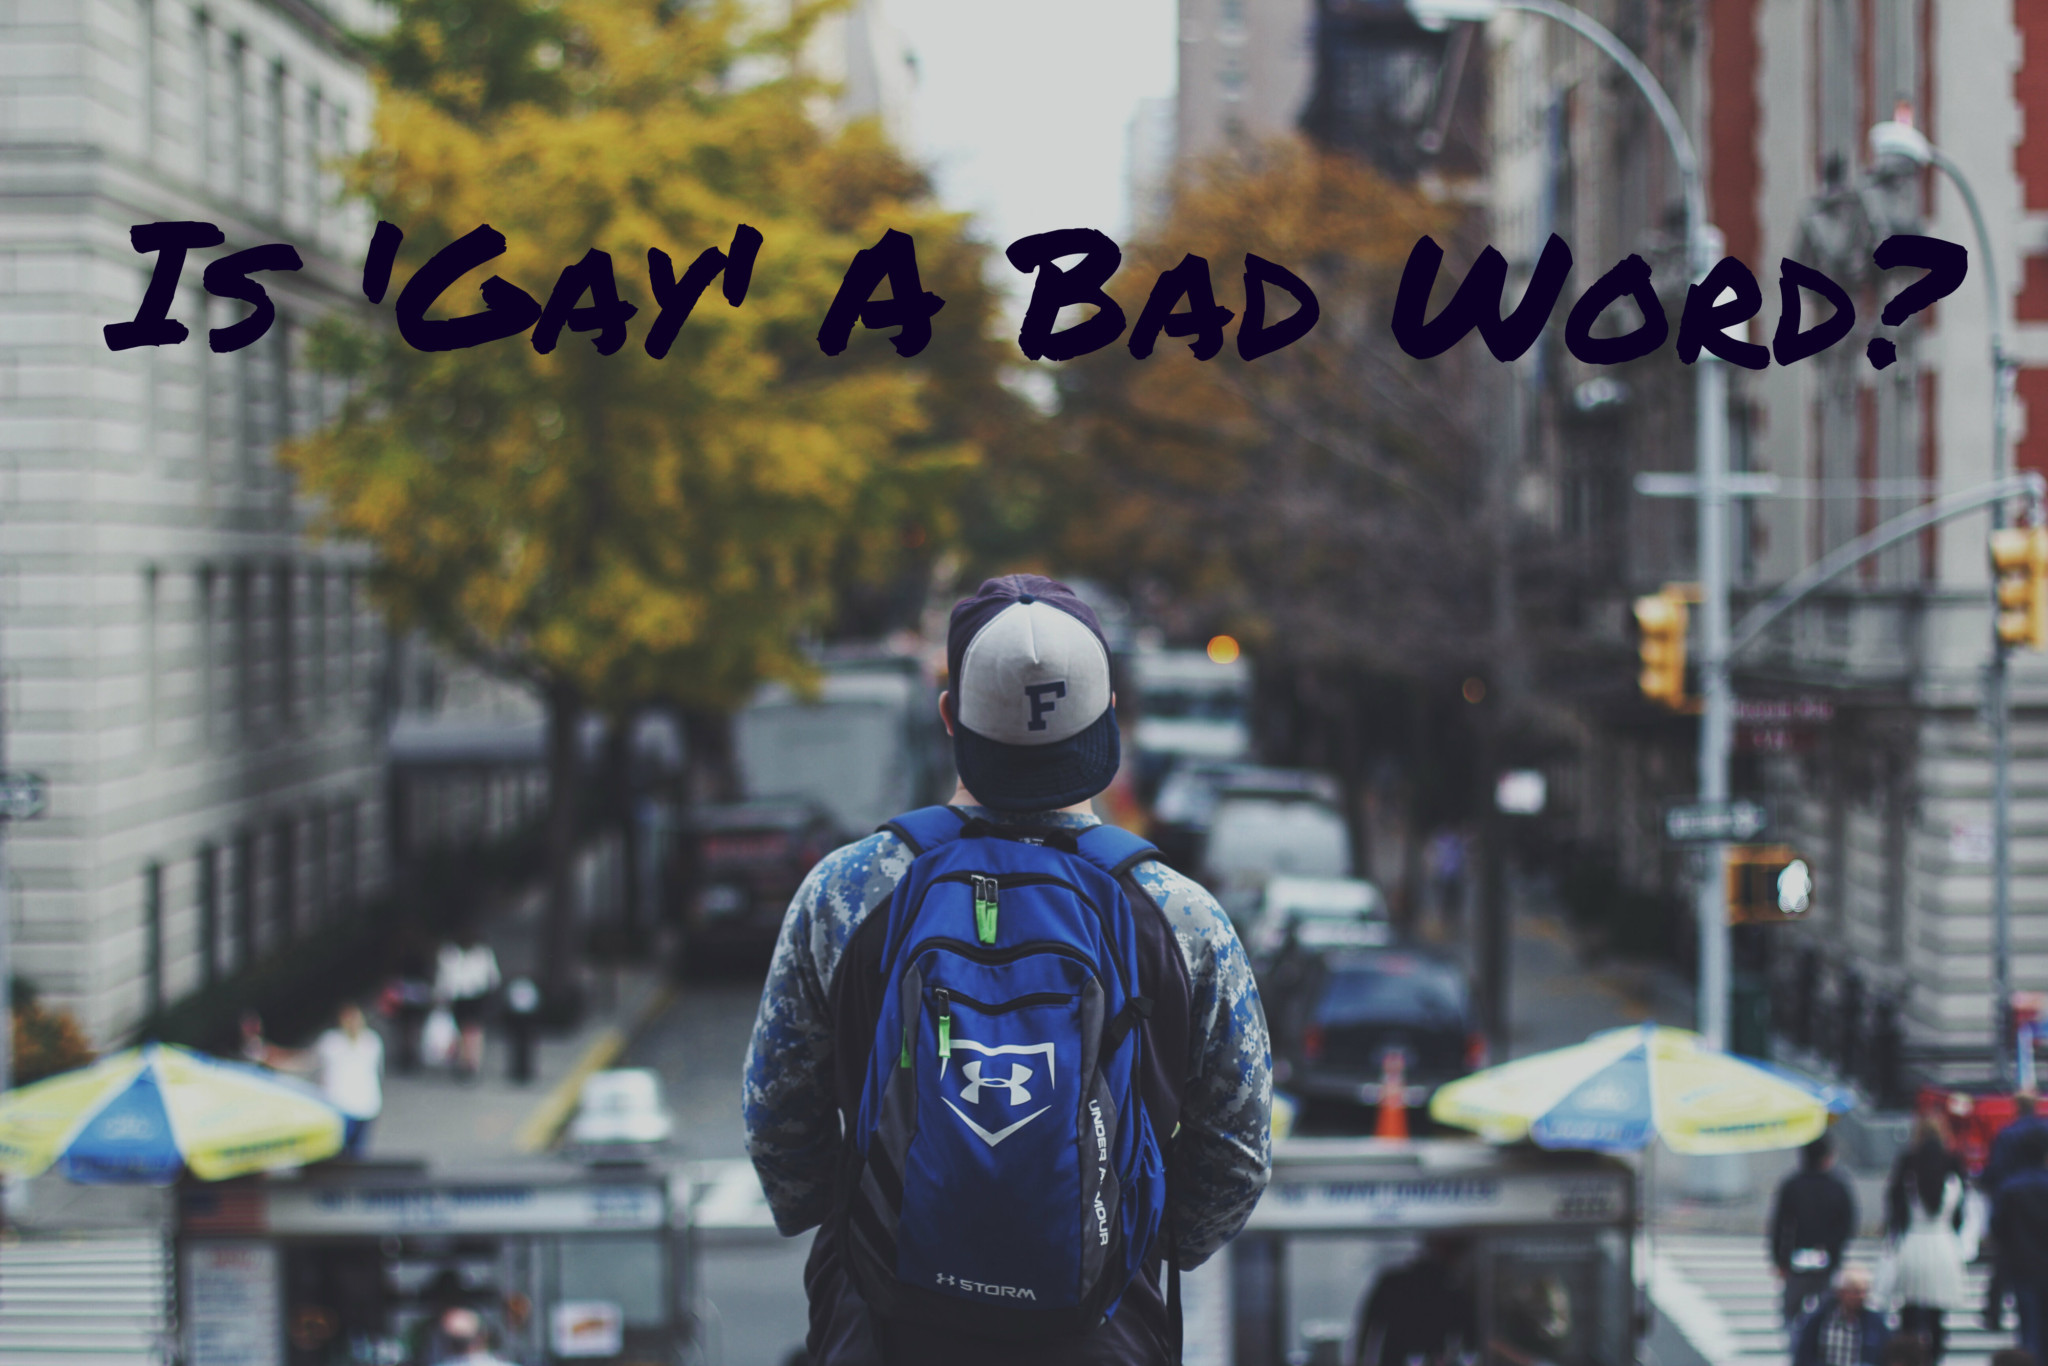 Is ‘Gay’ A Bad Word?